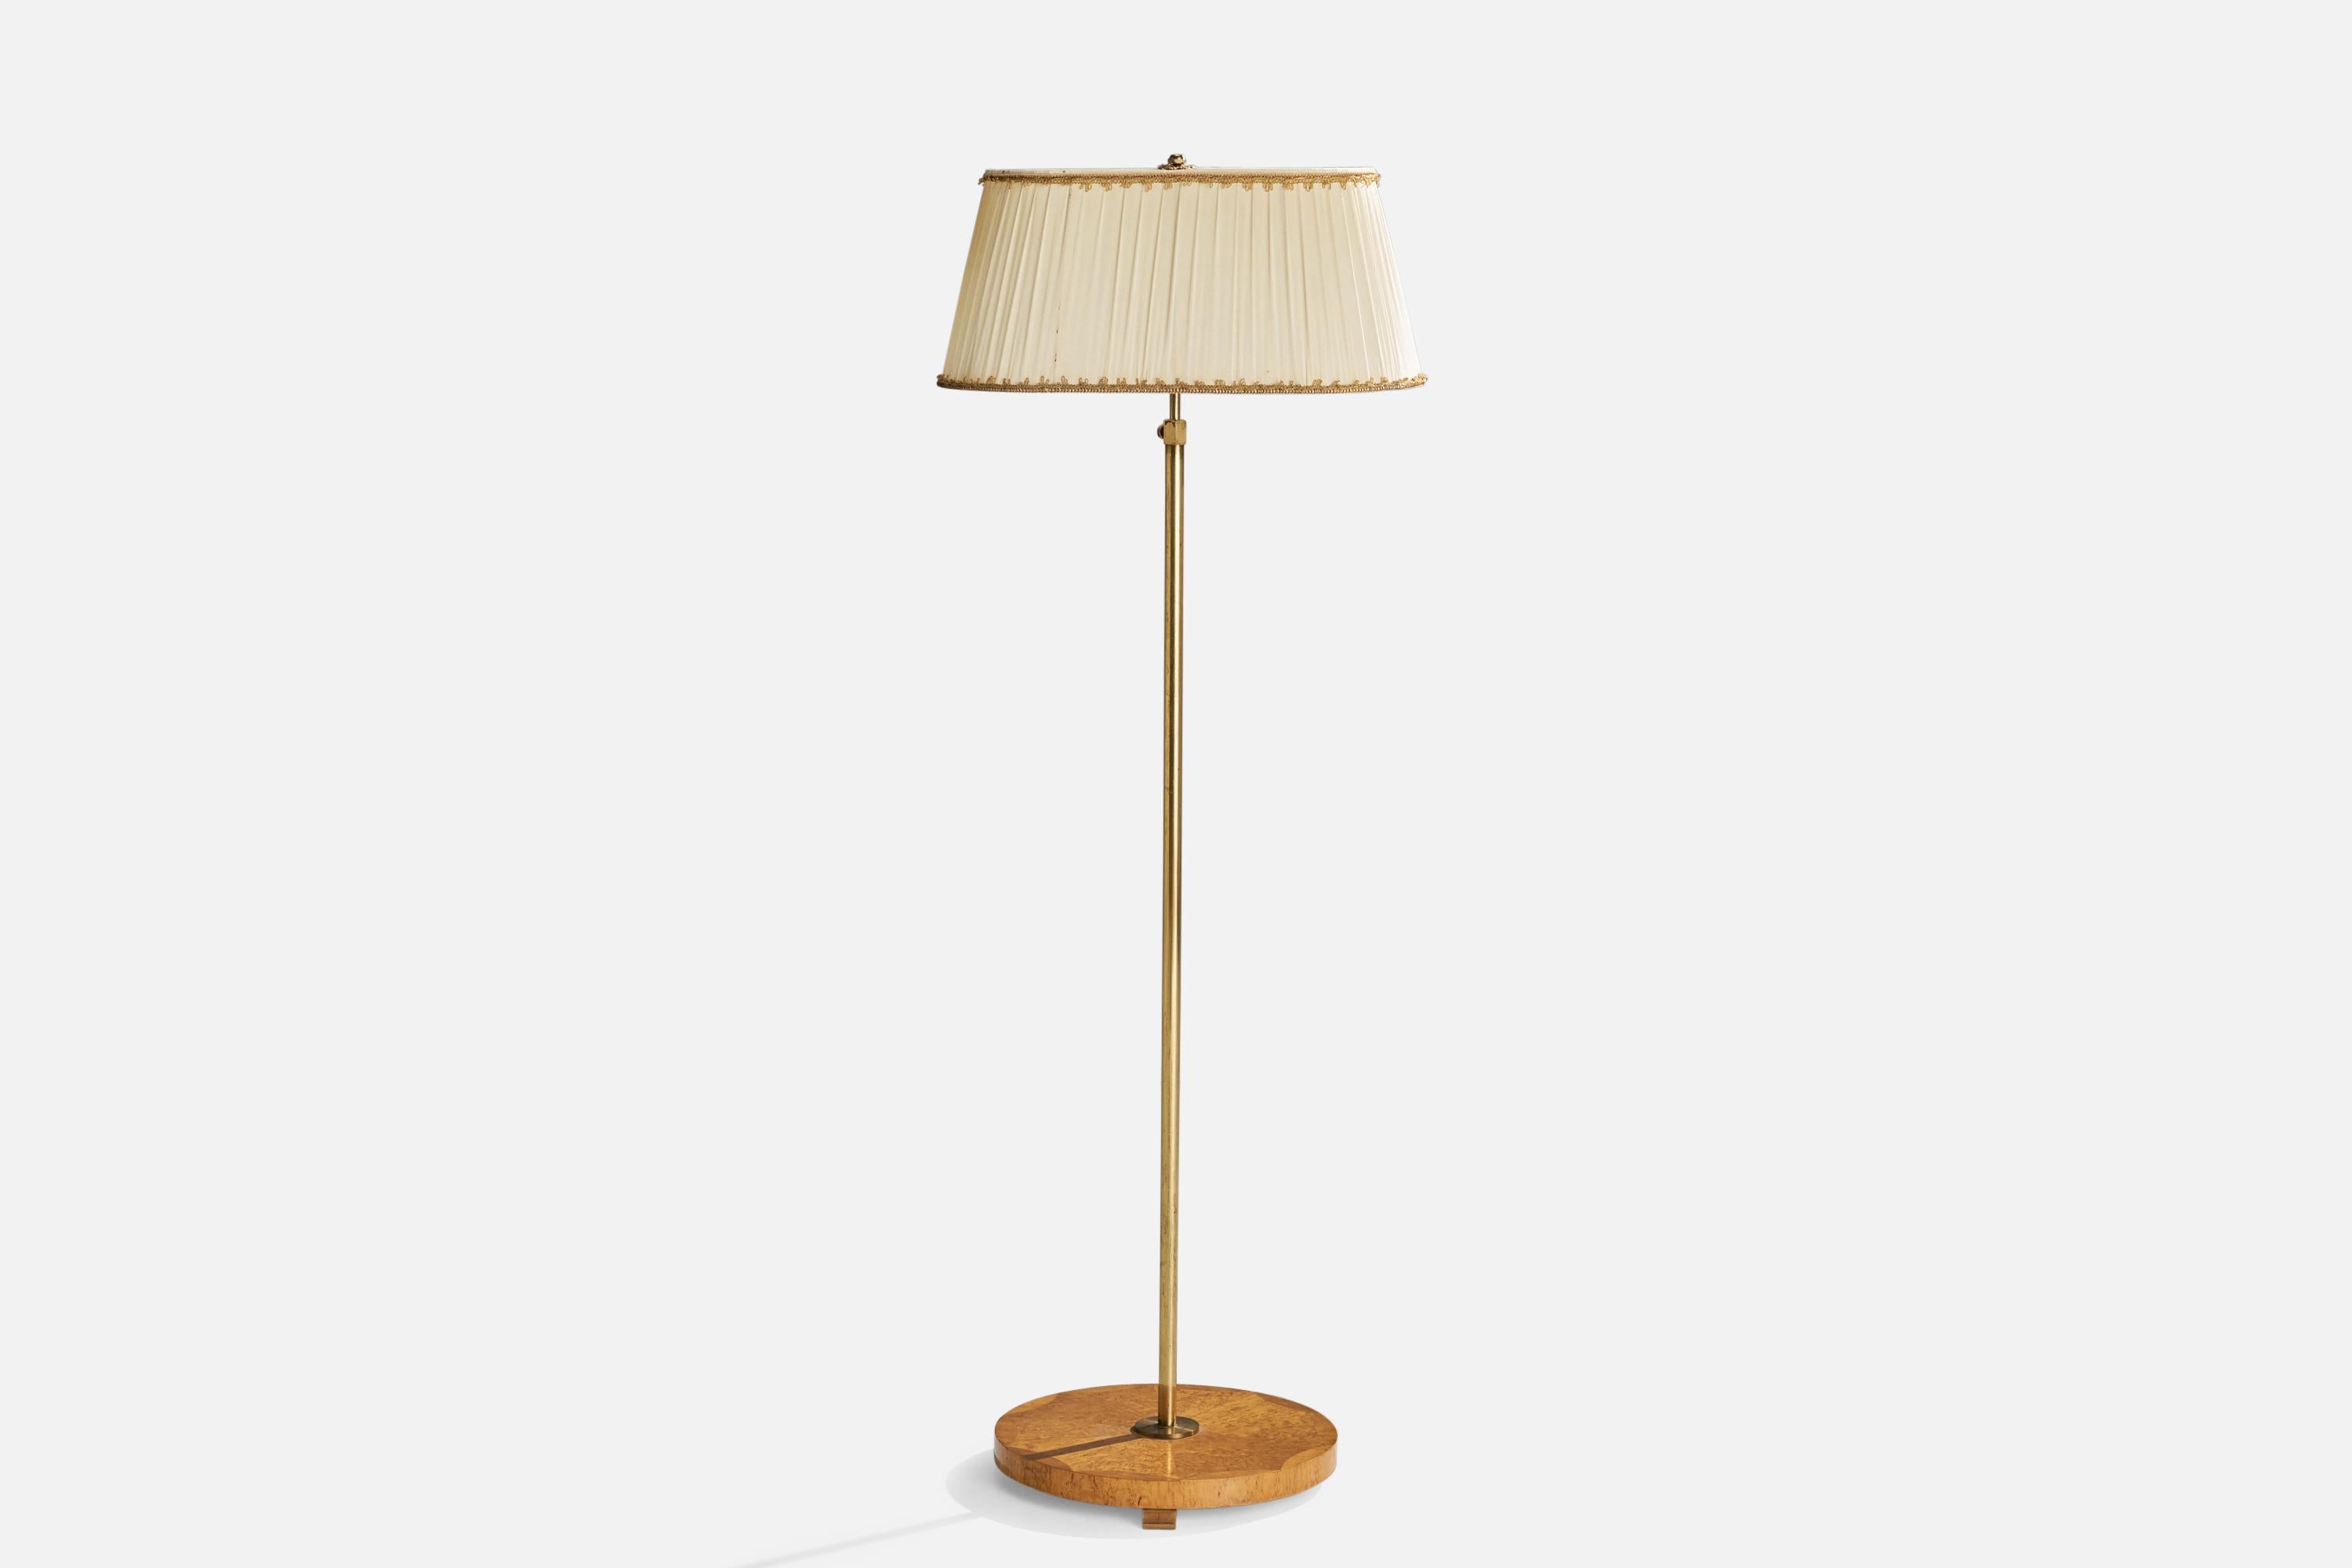 An adjustable brass, masur birch and off-white fabric floor lamp designed and produced in Sweden, 1930s.

Vintage lampshade in fair condition.
Overall Dimensions (inches): 73.23” H x 21.66”  W x 15.75” D
Stated dimensions include shade.
Bulb